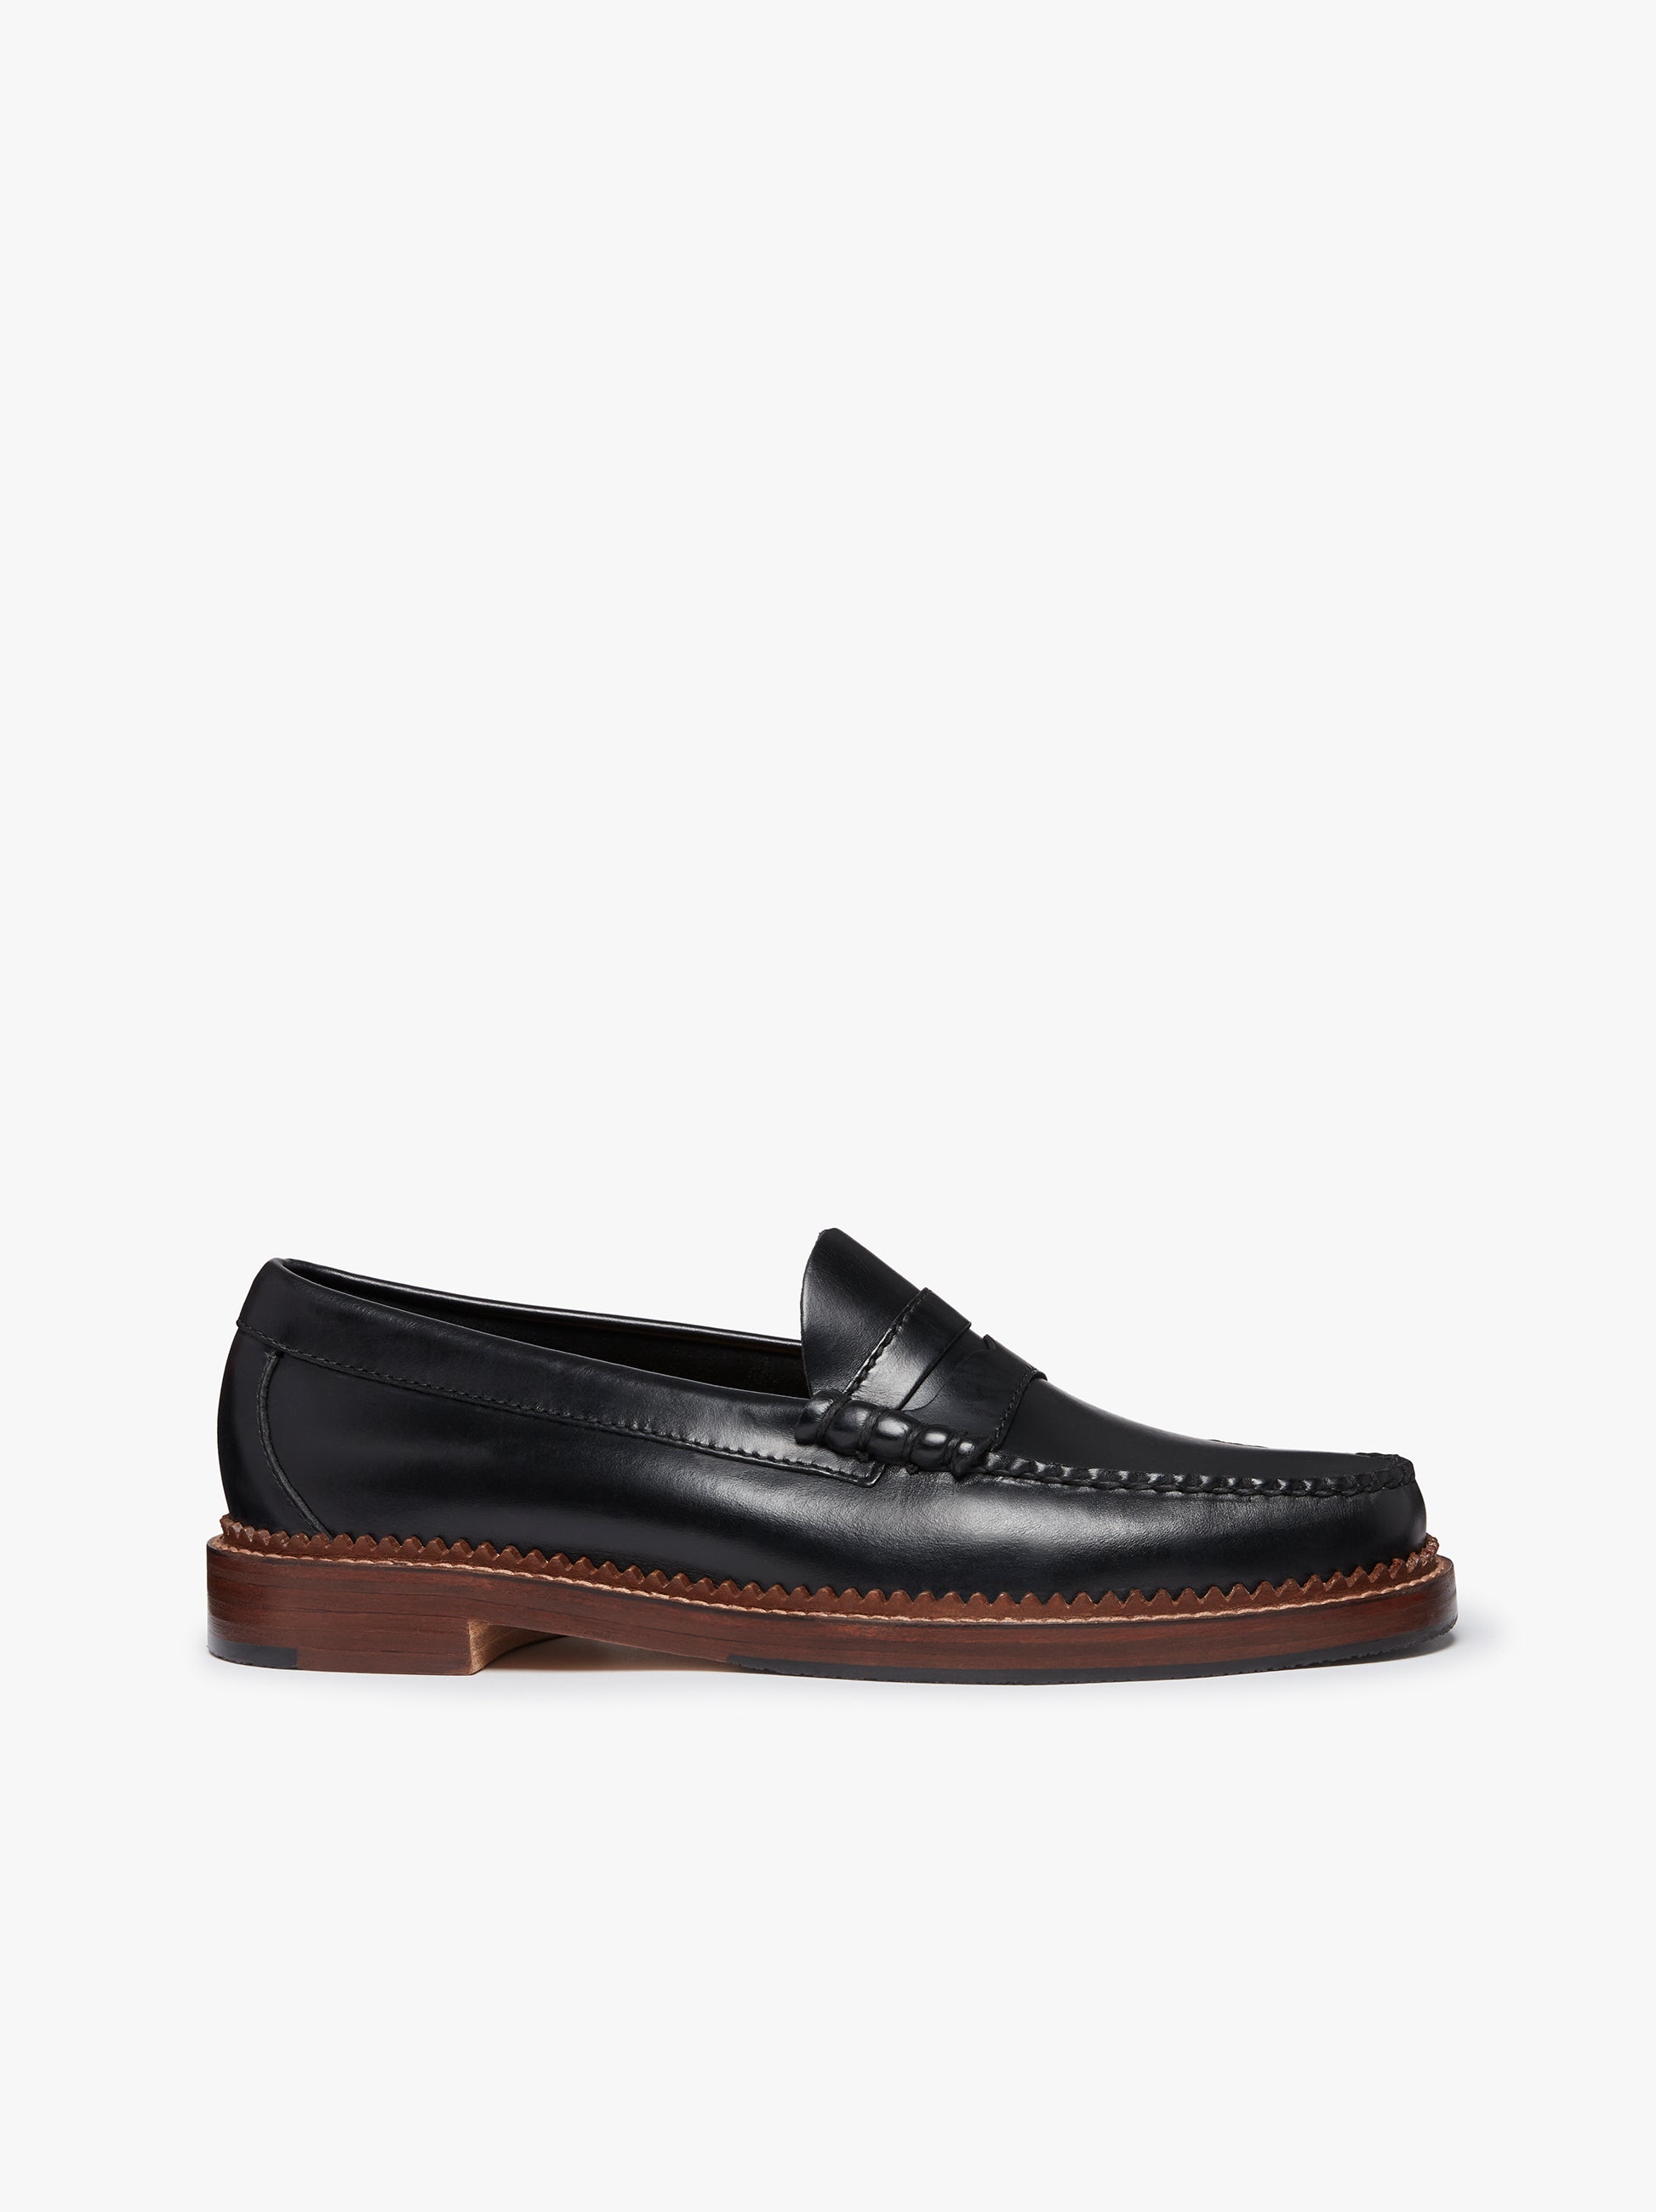 WEEJUN HERITAGE CLASSIC LEATHER PENNY LOAFER